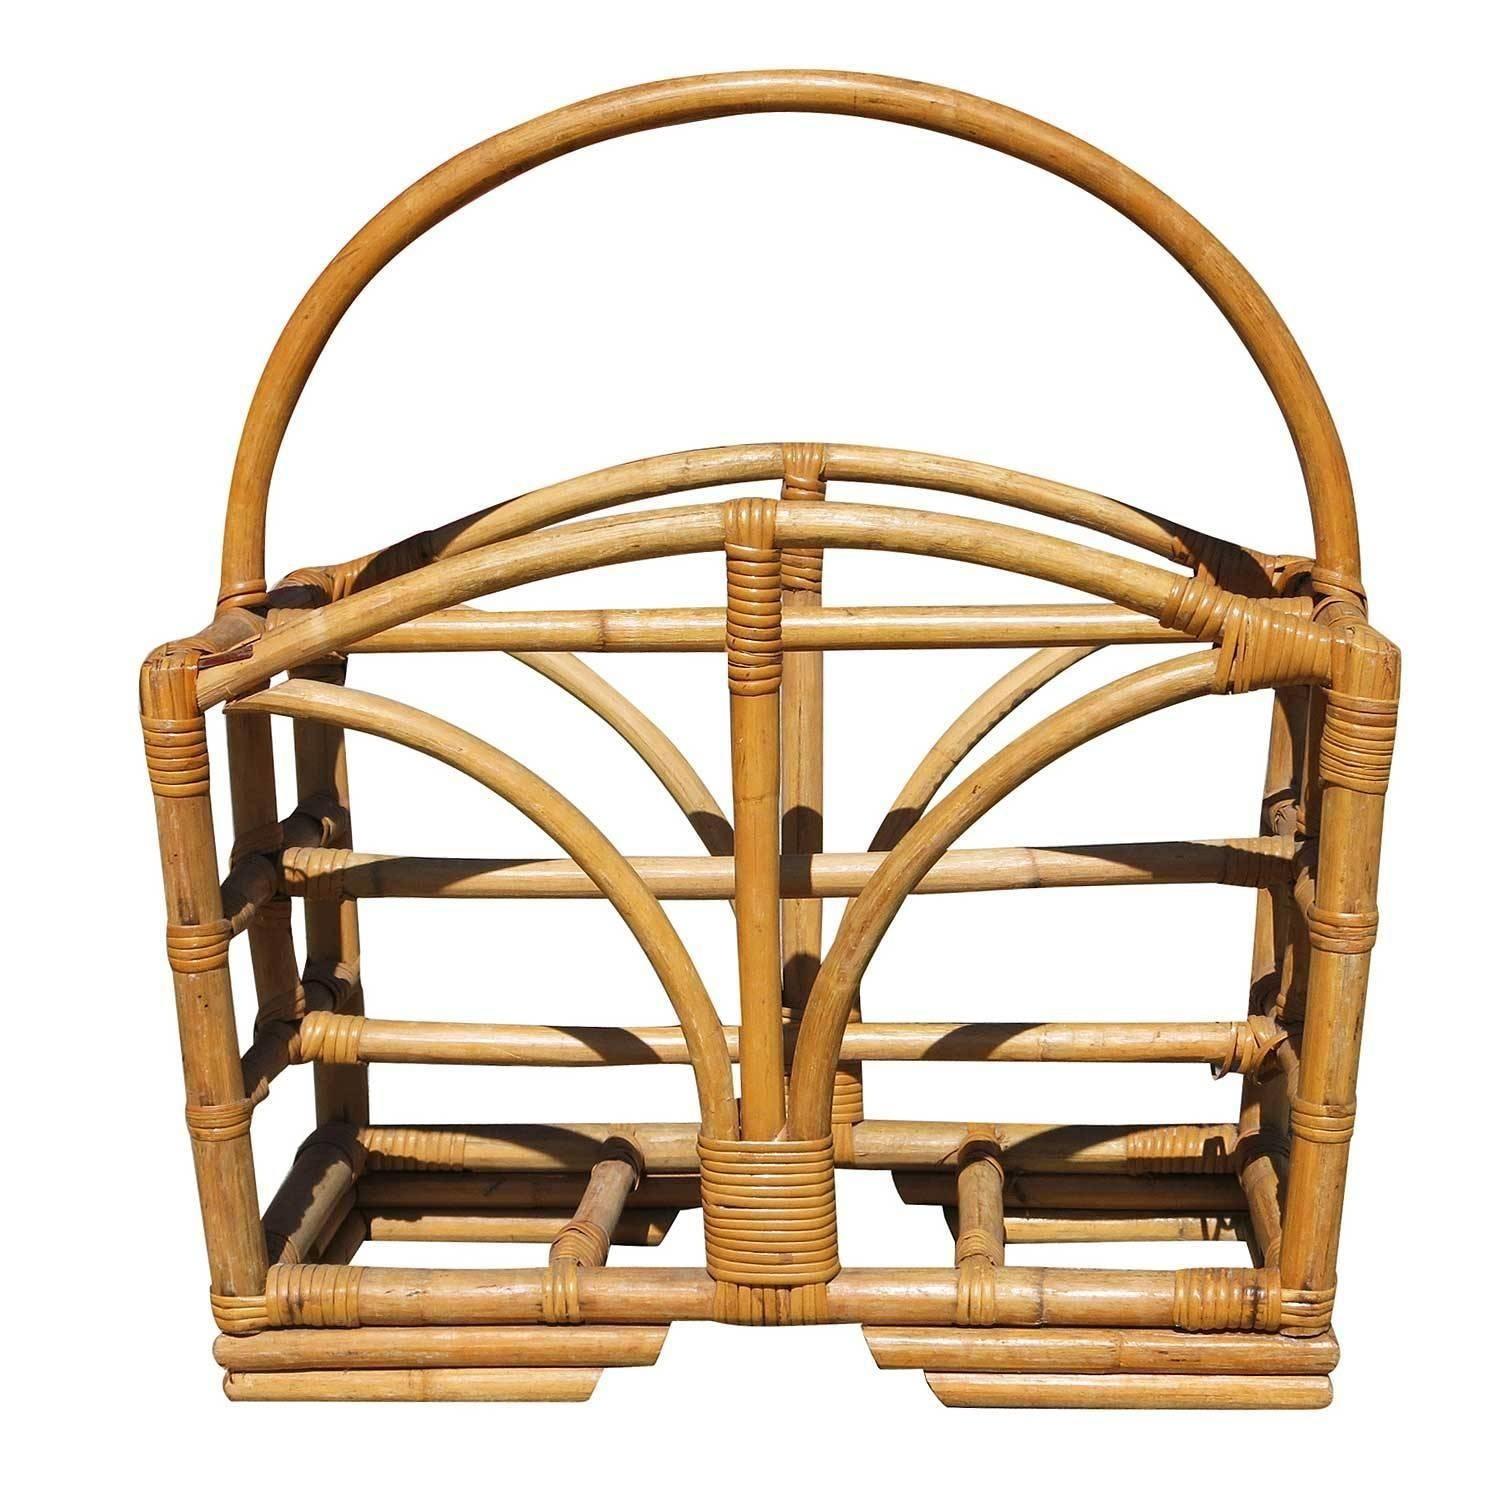 Pole rattan magazine rack with stacked base and sprouting side decoration.
1950, United States
Restored to new for you.
We only purchase and sell only the best and finest rattan furniture made by the best and most well-known American designers